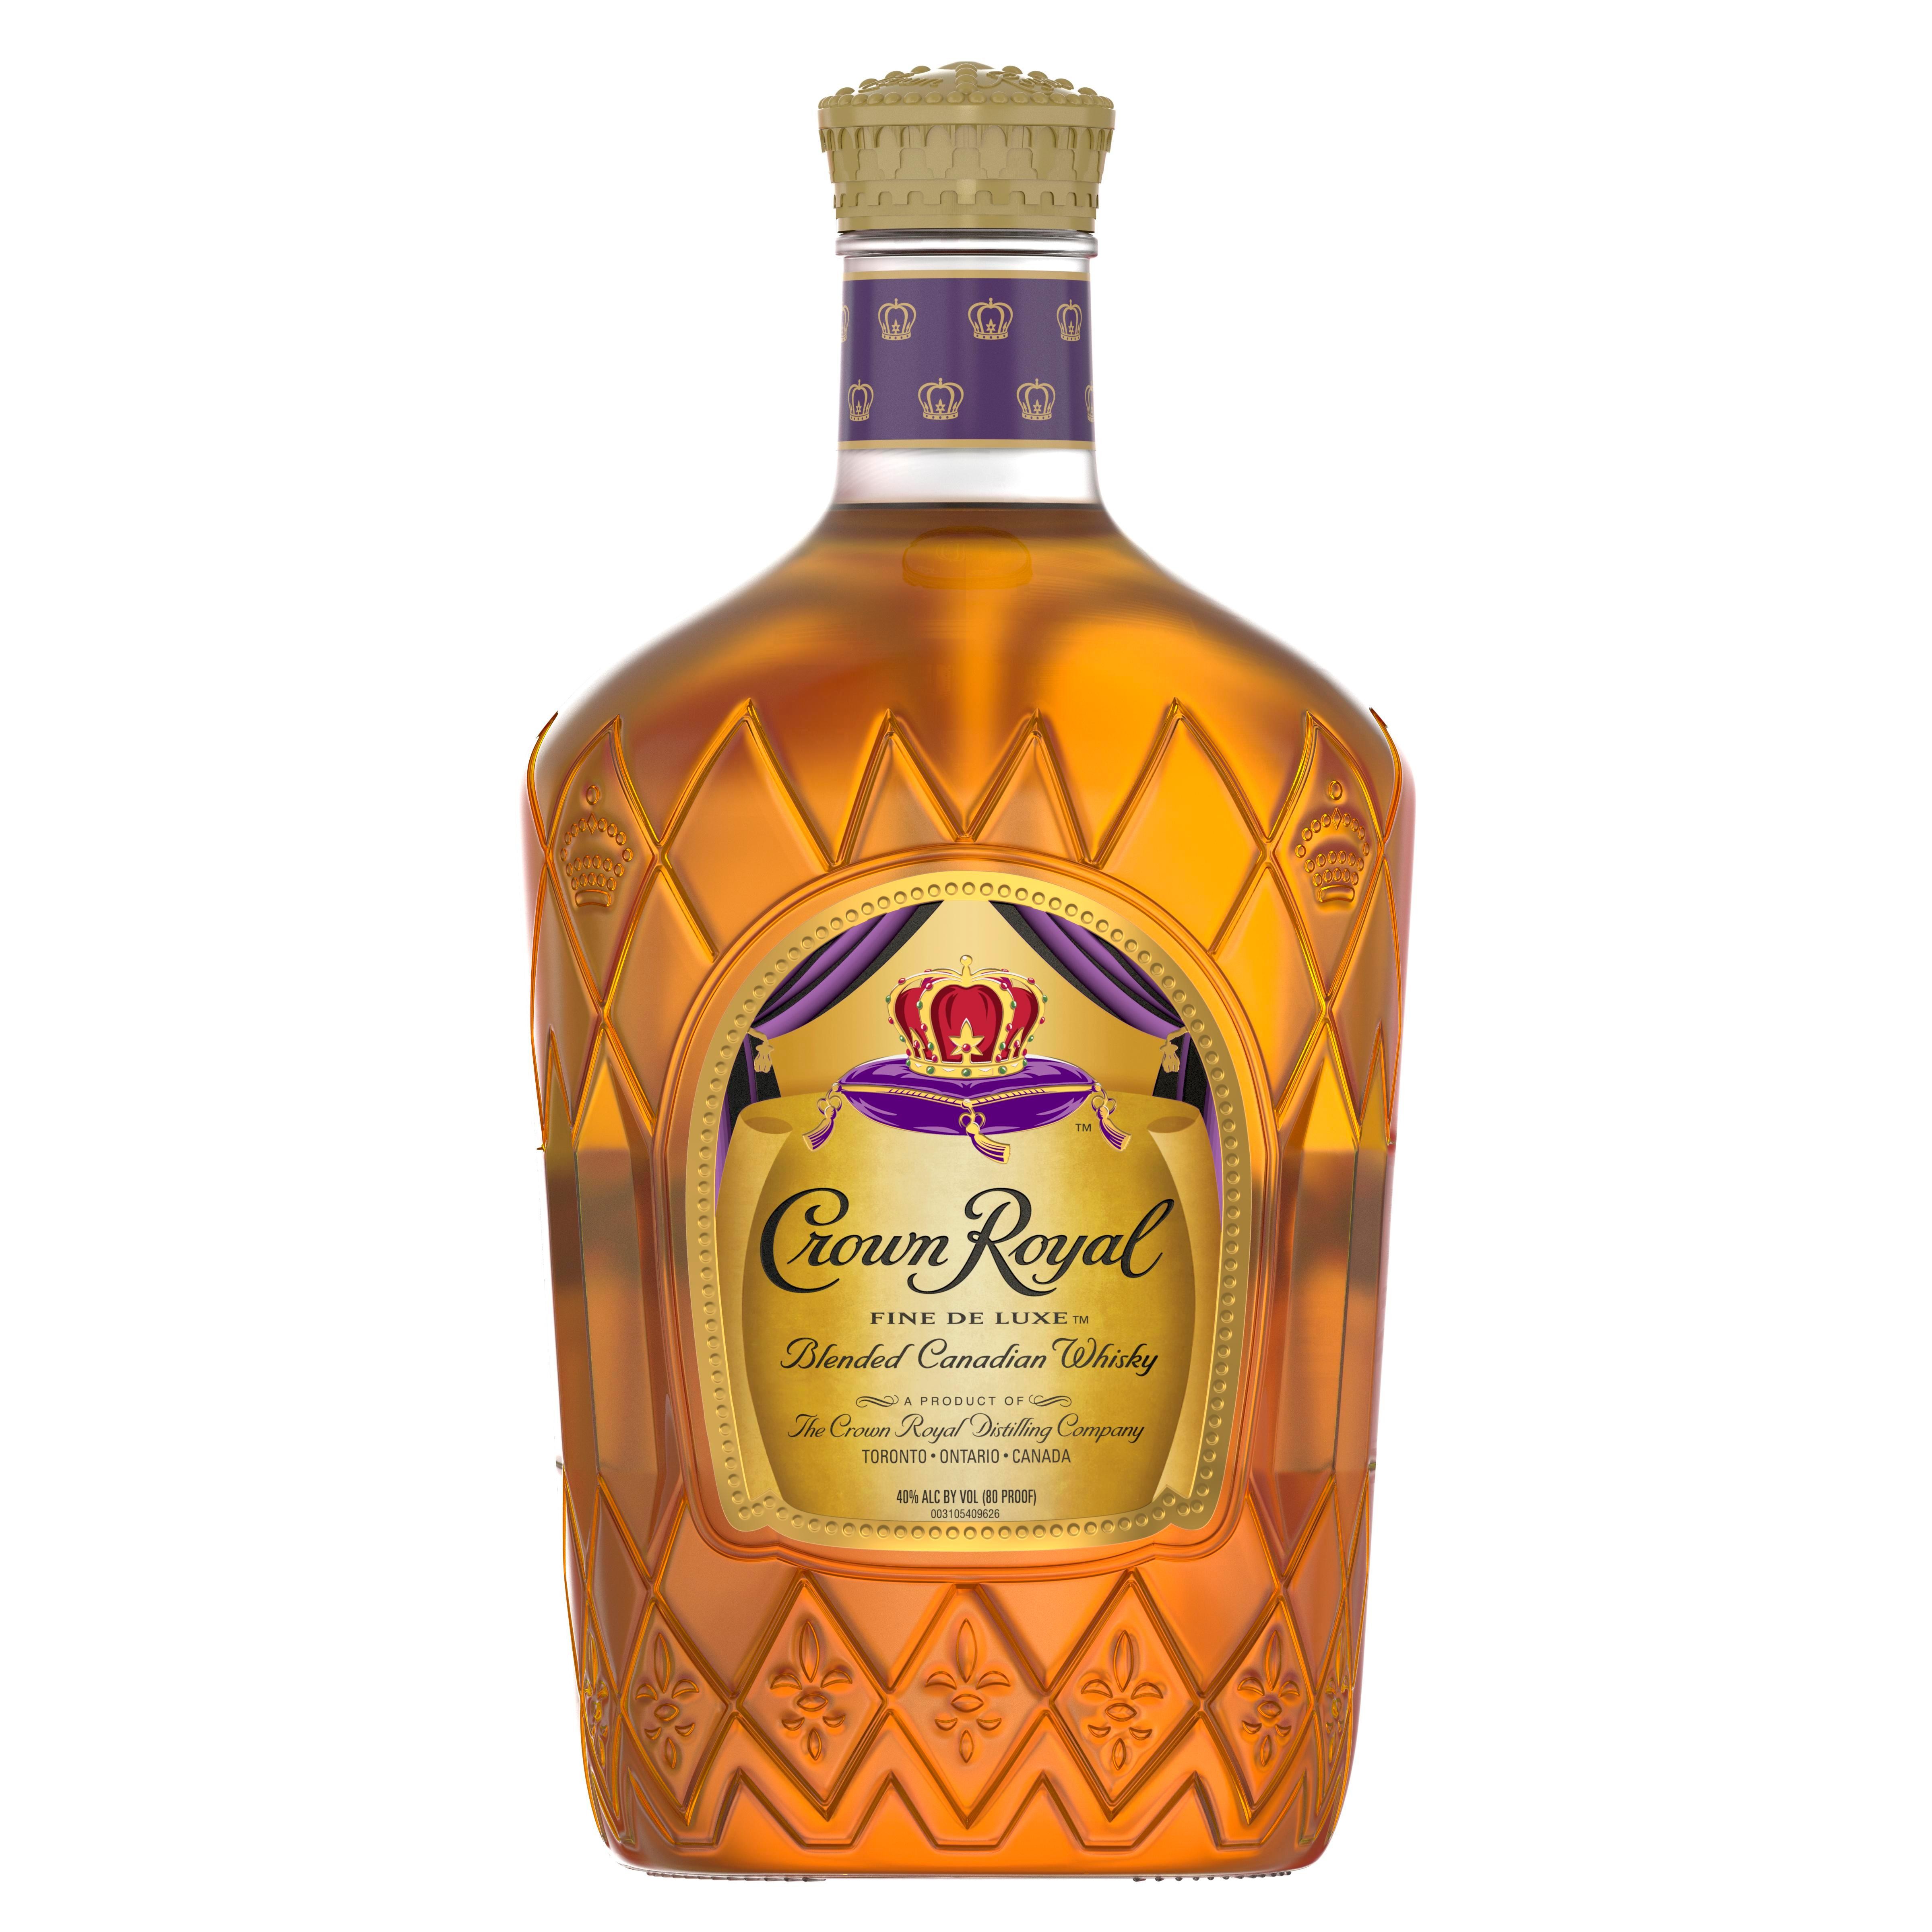 Crown Royal Fine Deluxe Canadian Blended Whisky - 1.75 L